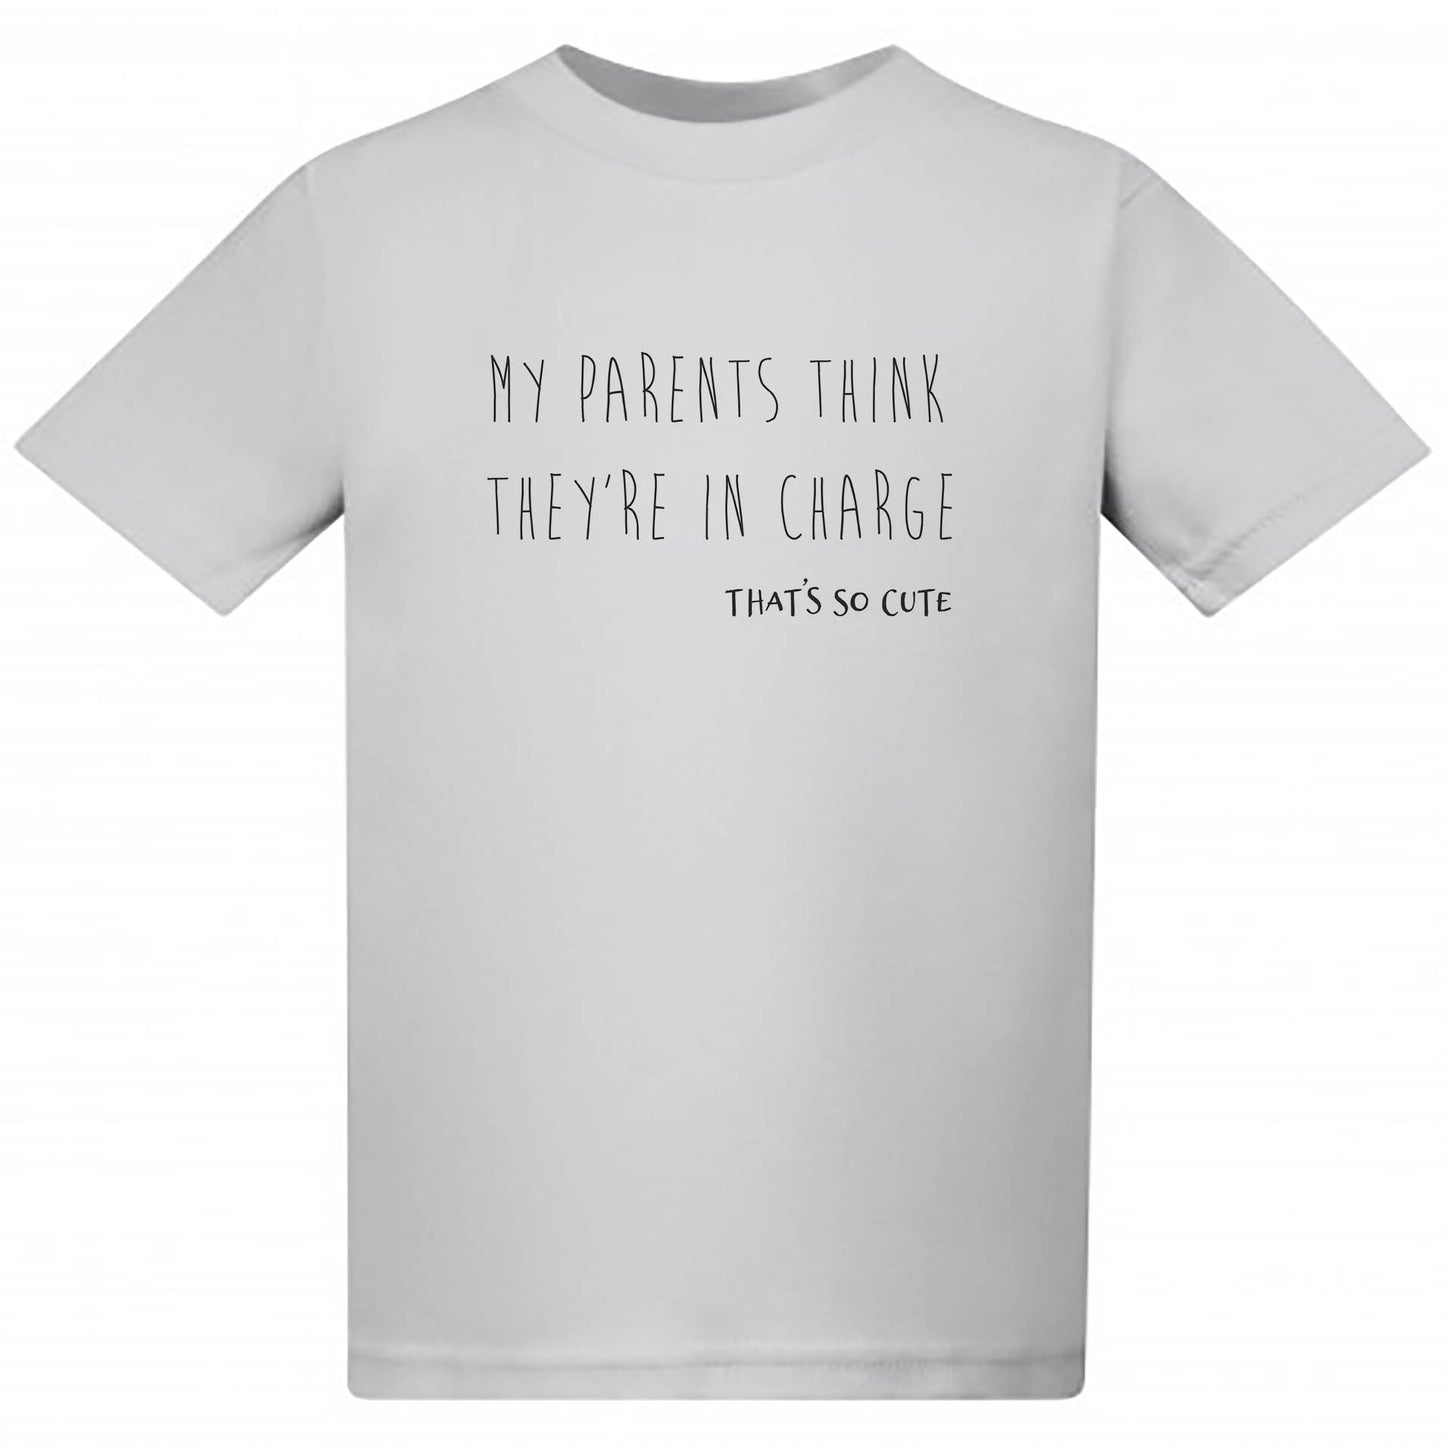 My Parents think they're in charge Toddler 100% cotton T Shirt